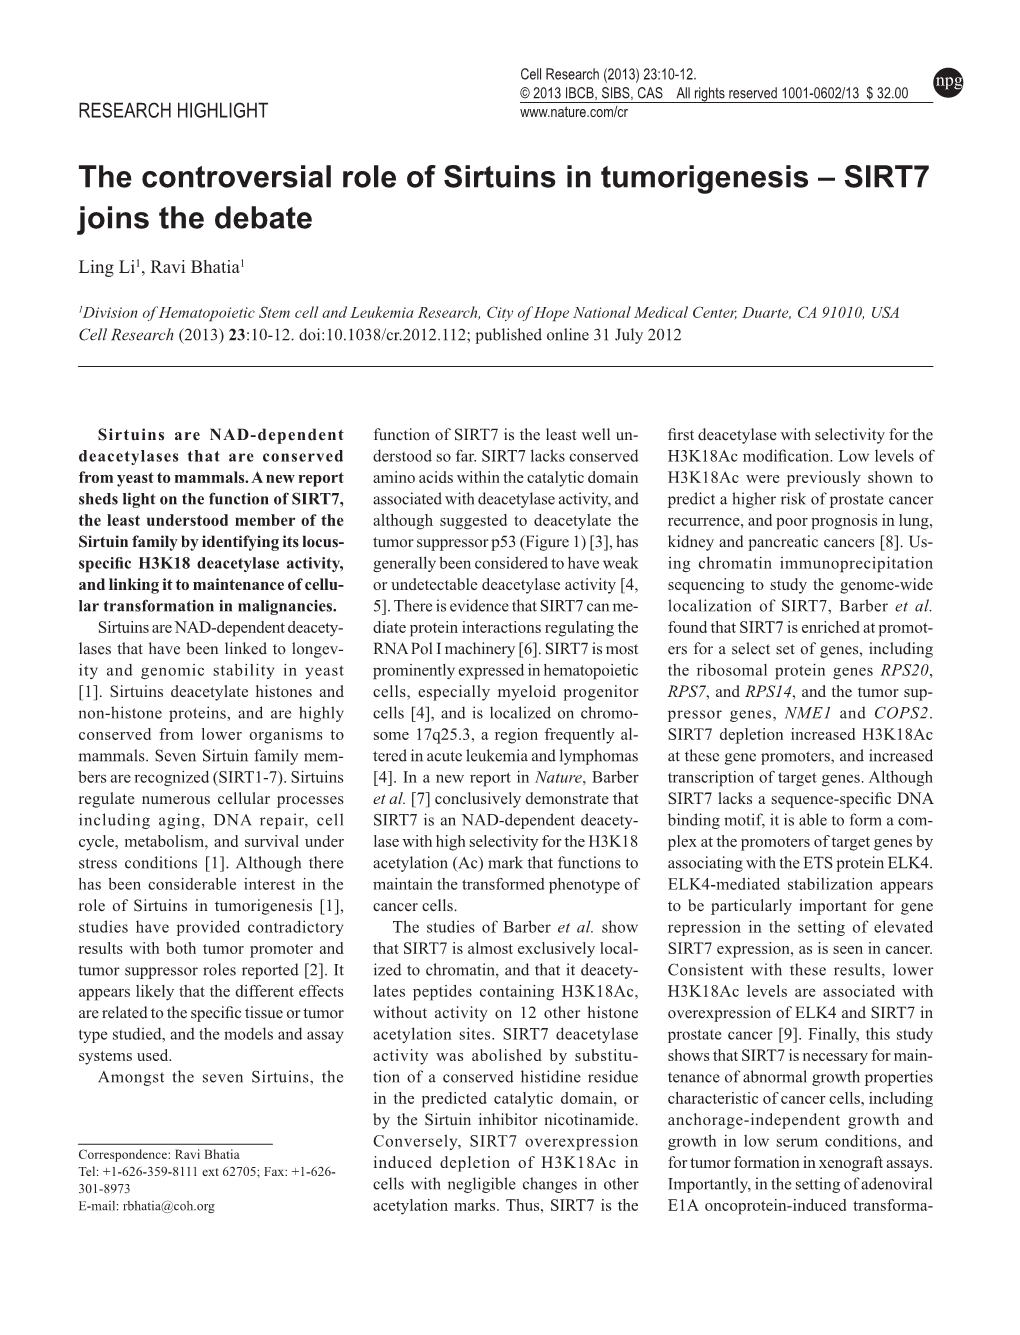 The Controversial Role of Sirtuins in Tumorigenesis — SIRT7 Joins The